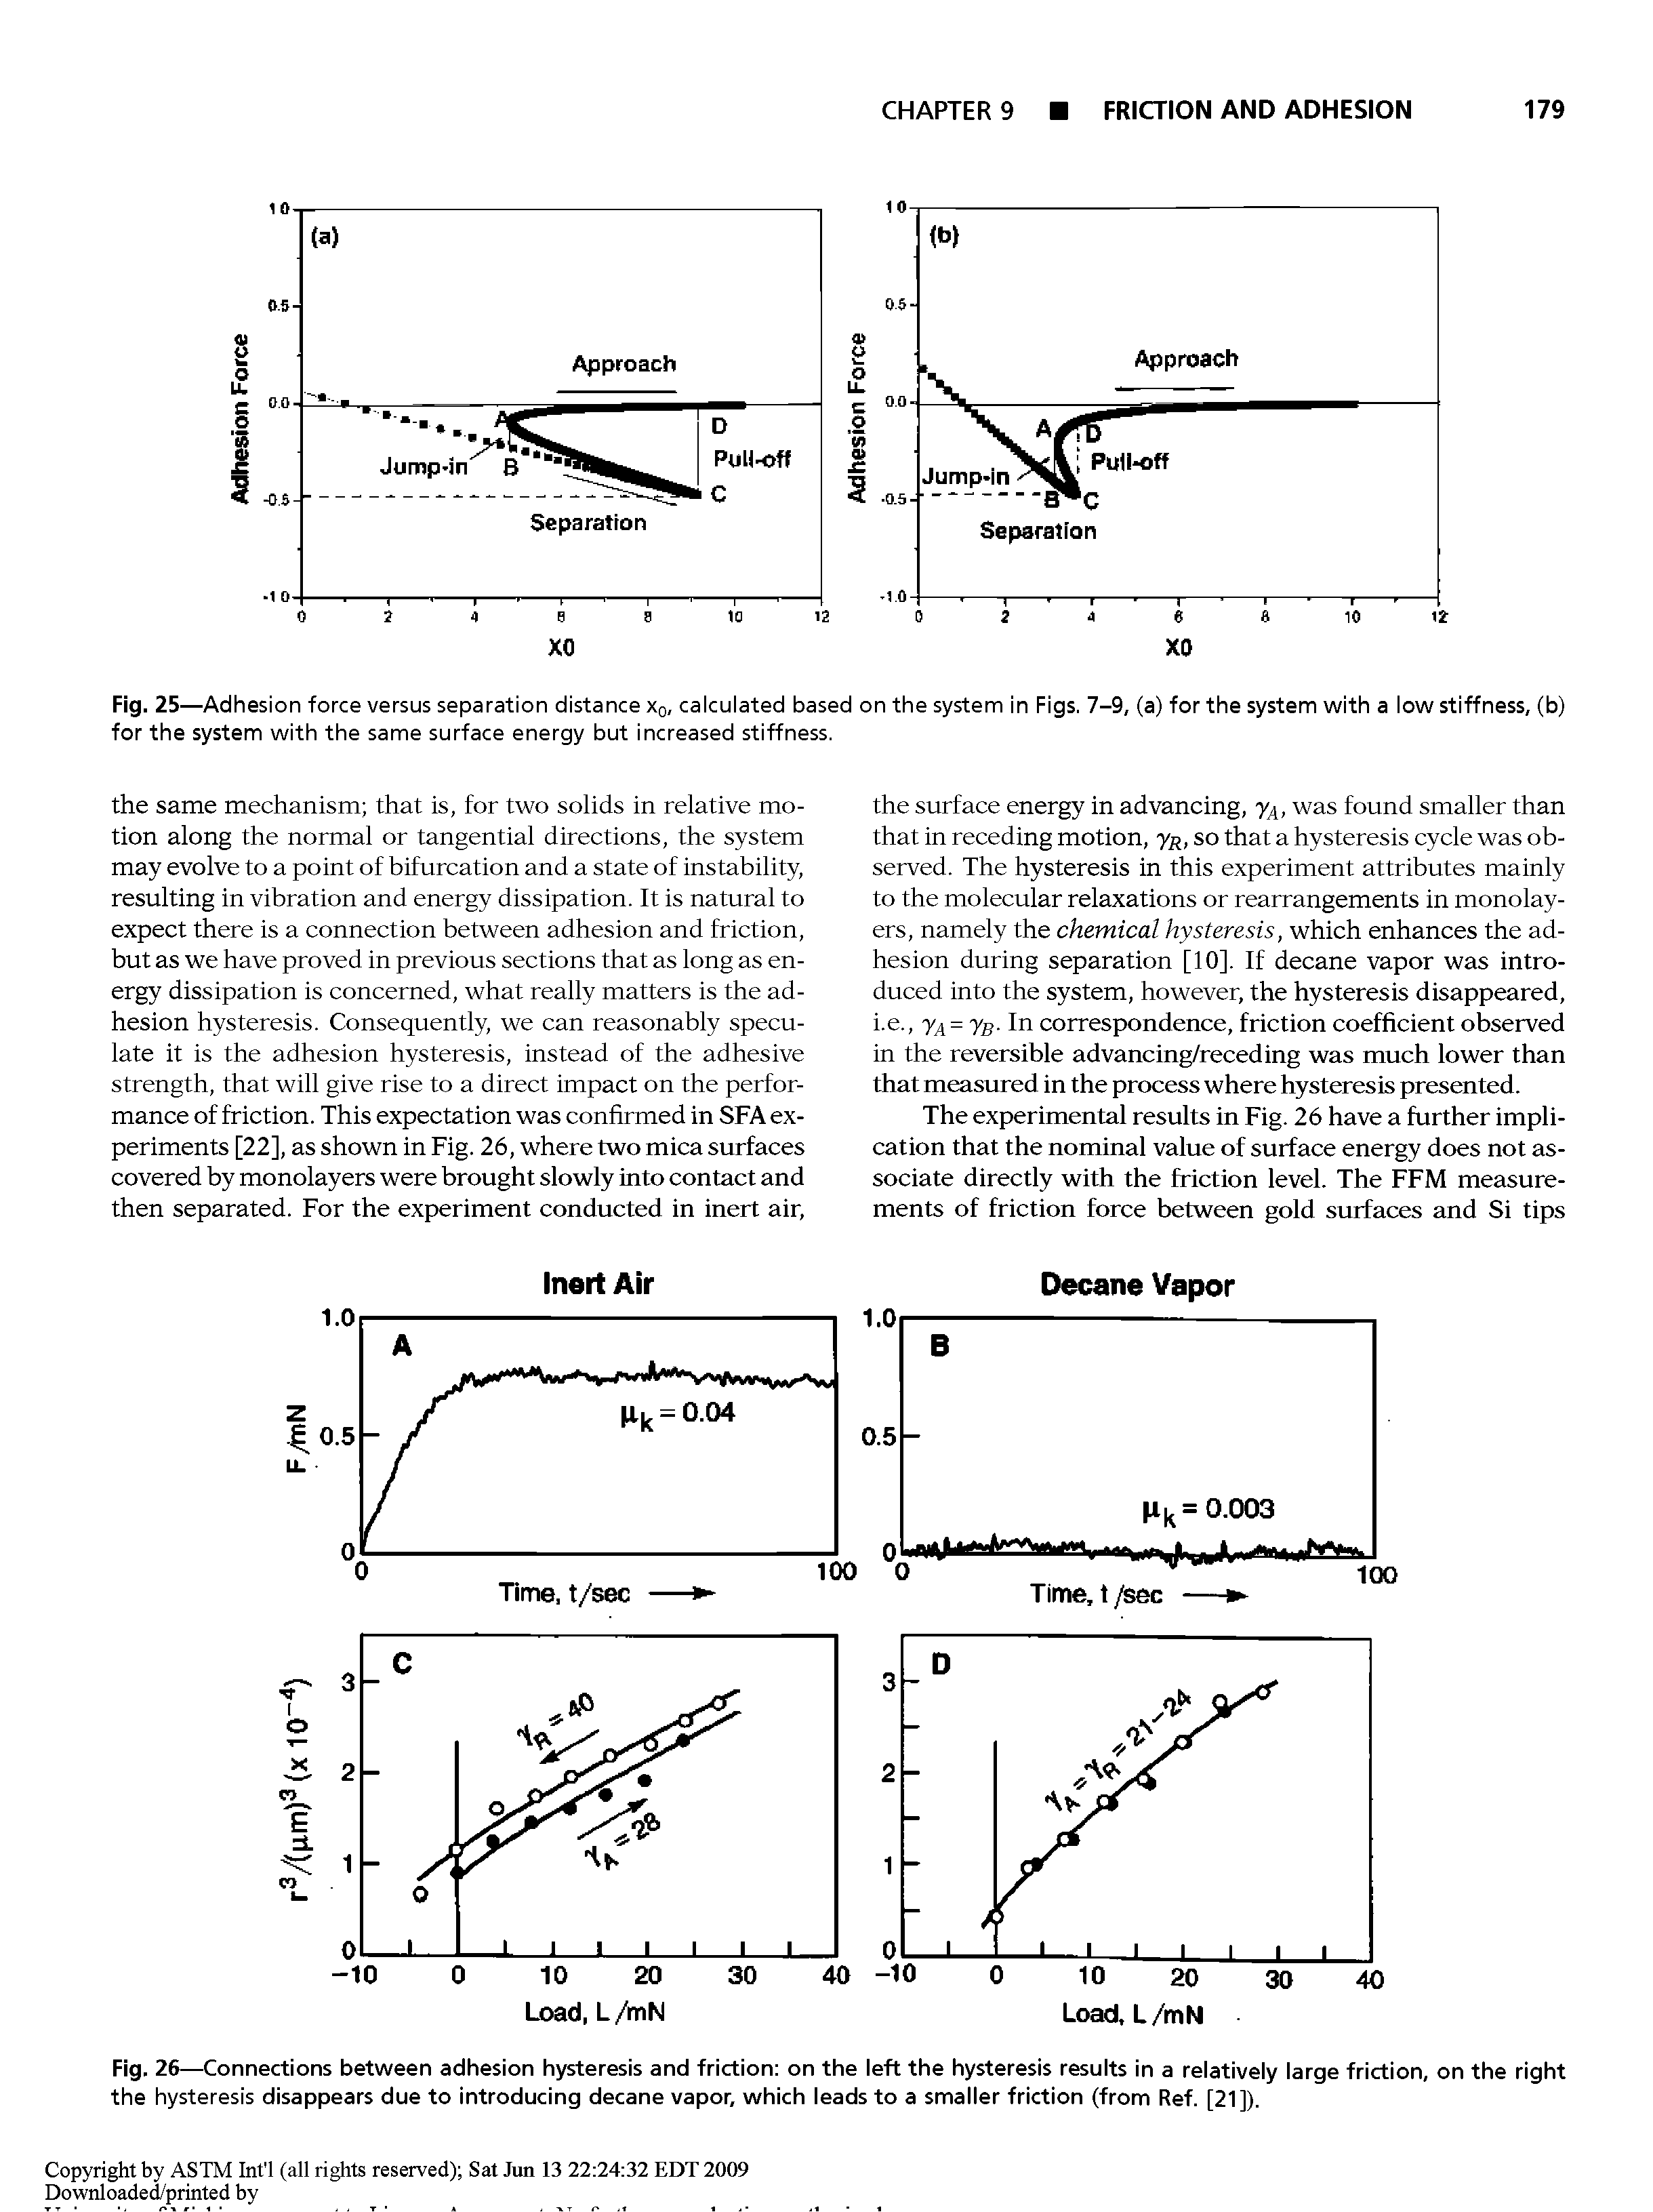 Fig. 26—Connections between adhesion hysteresis and friction on the left the hysteresis results in a relatively large friction, on the right the hysteresis disappears due to introducing decane vapor, which leads to a smaller friction (from Ref. [21]).